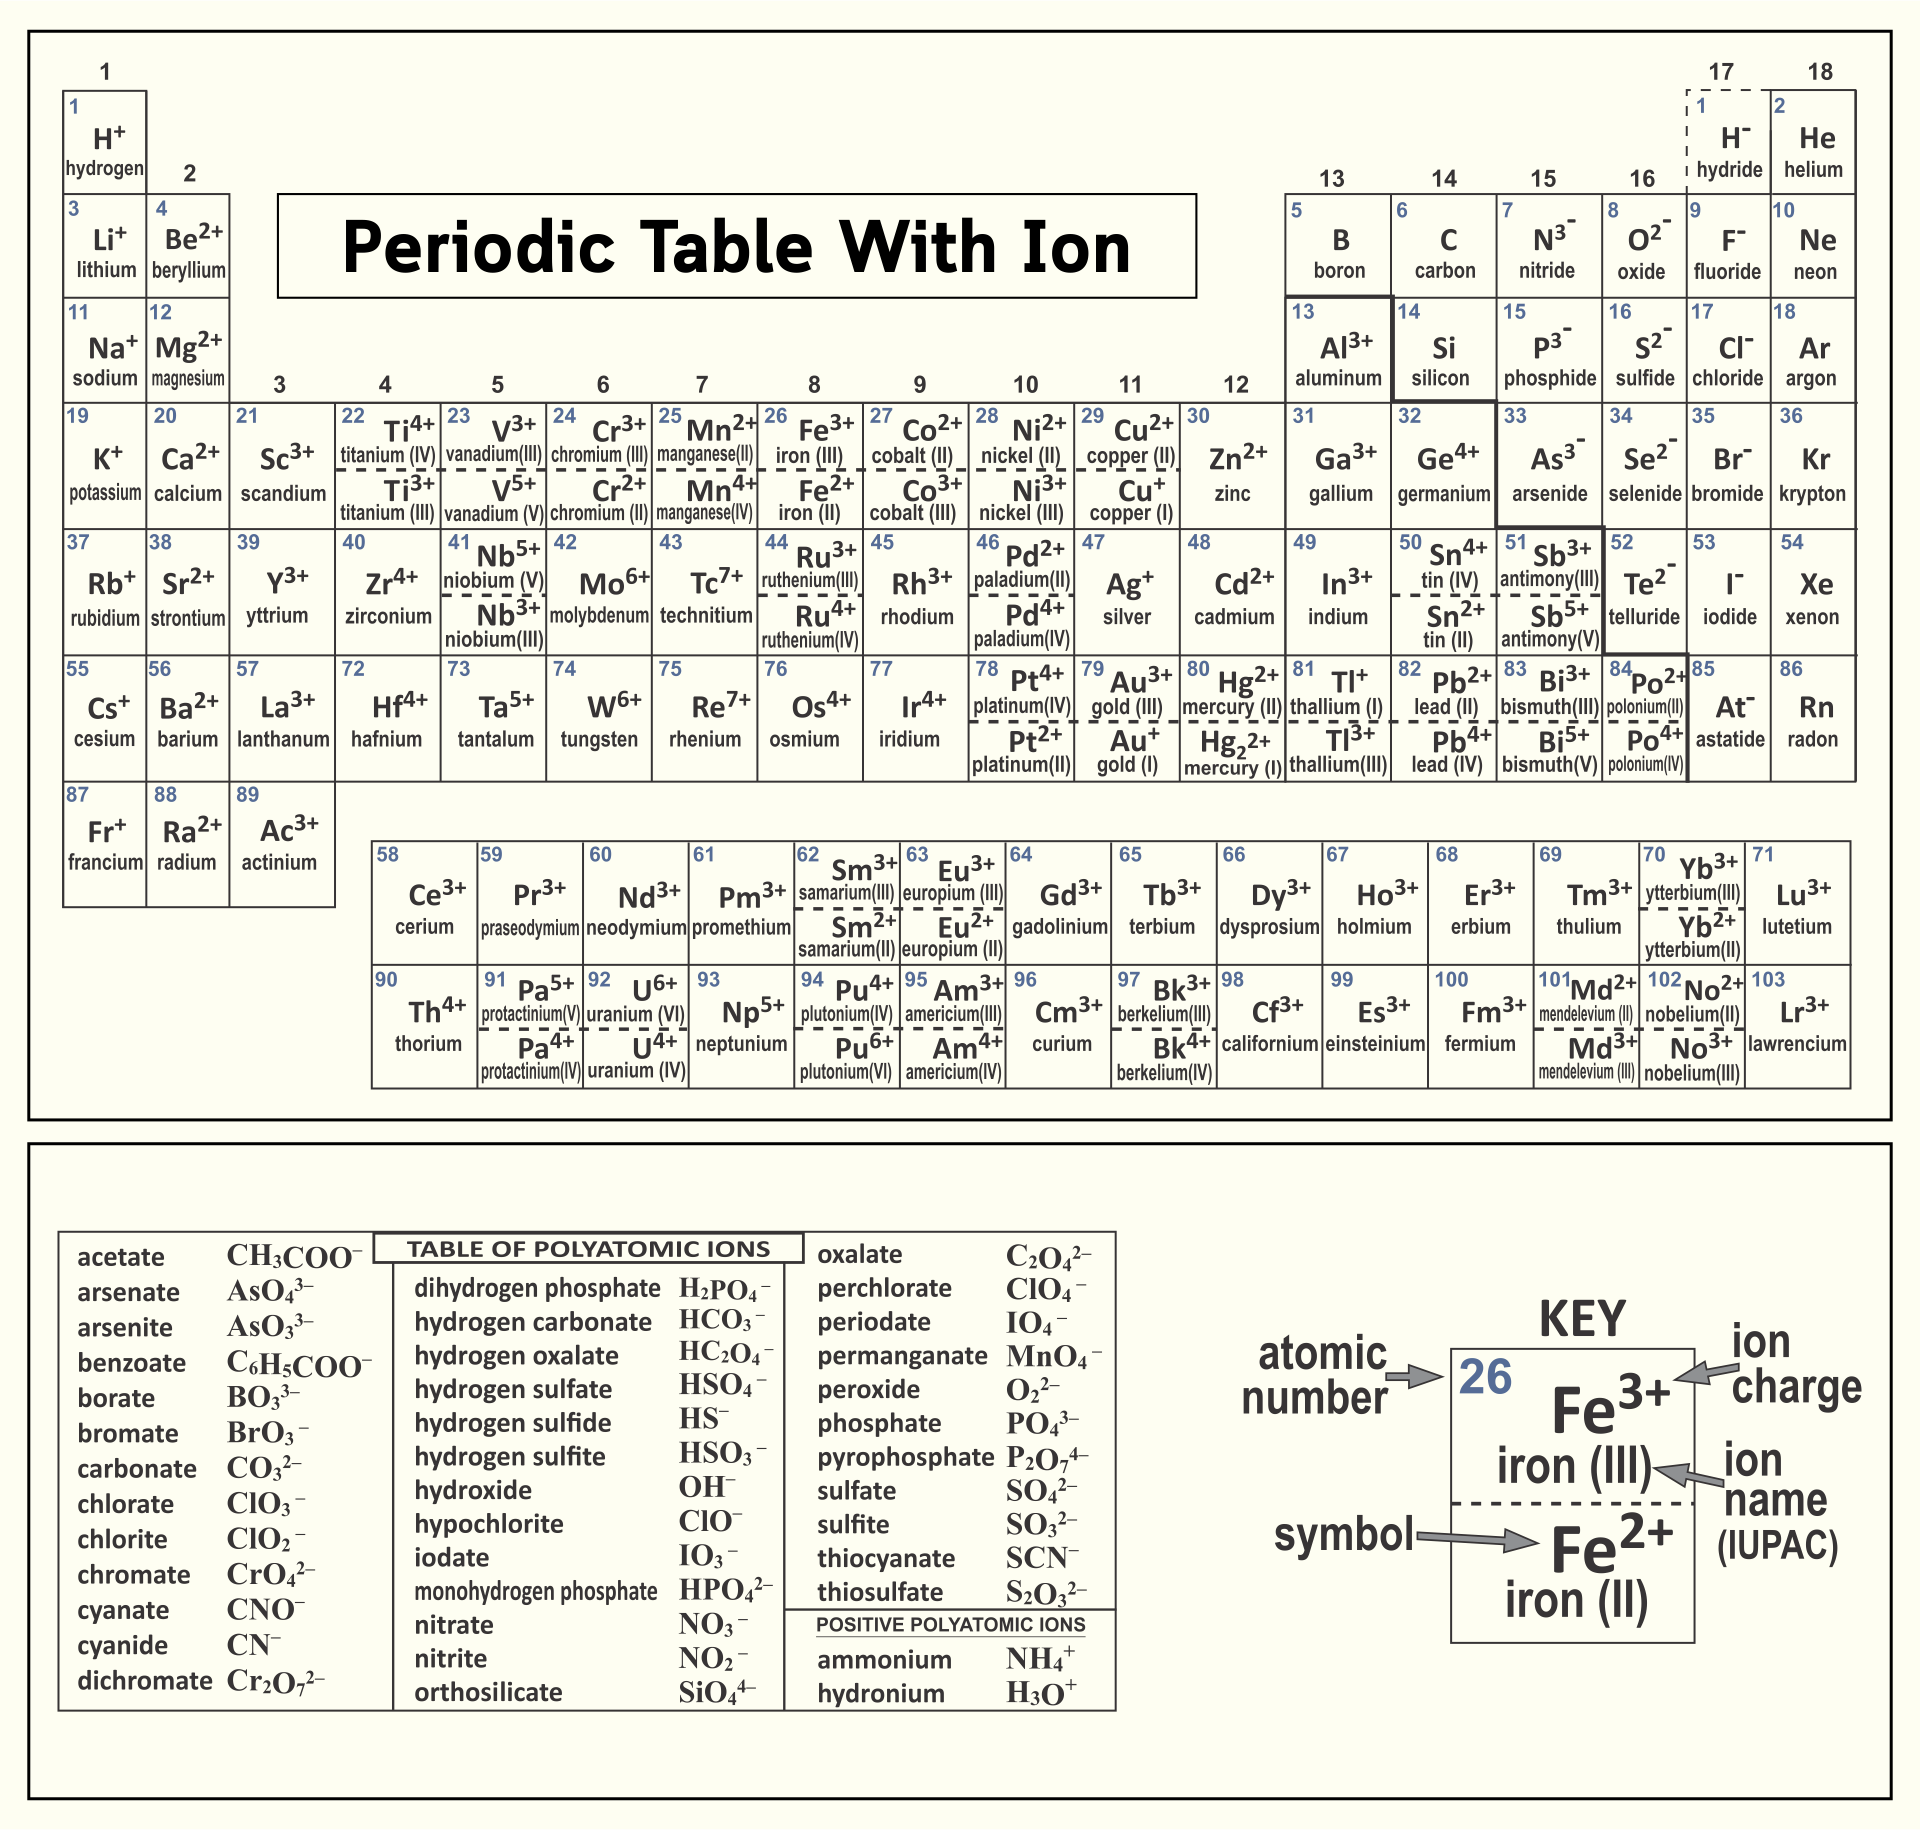 Periodic Table with Ion Chart